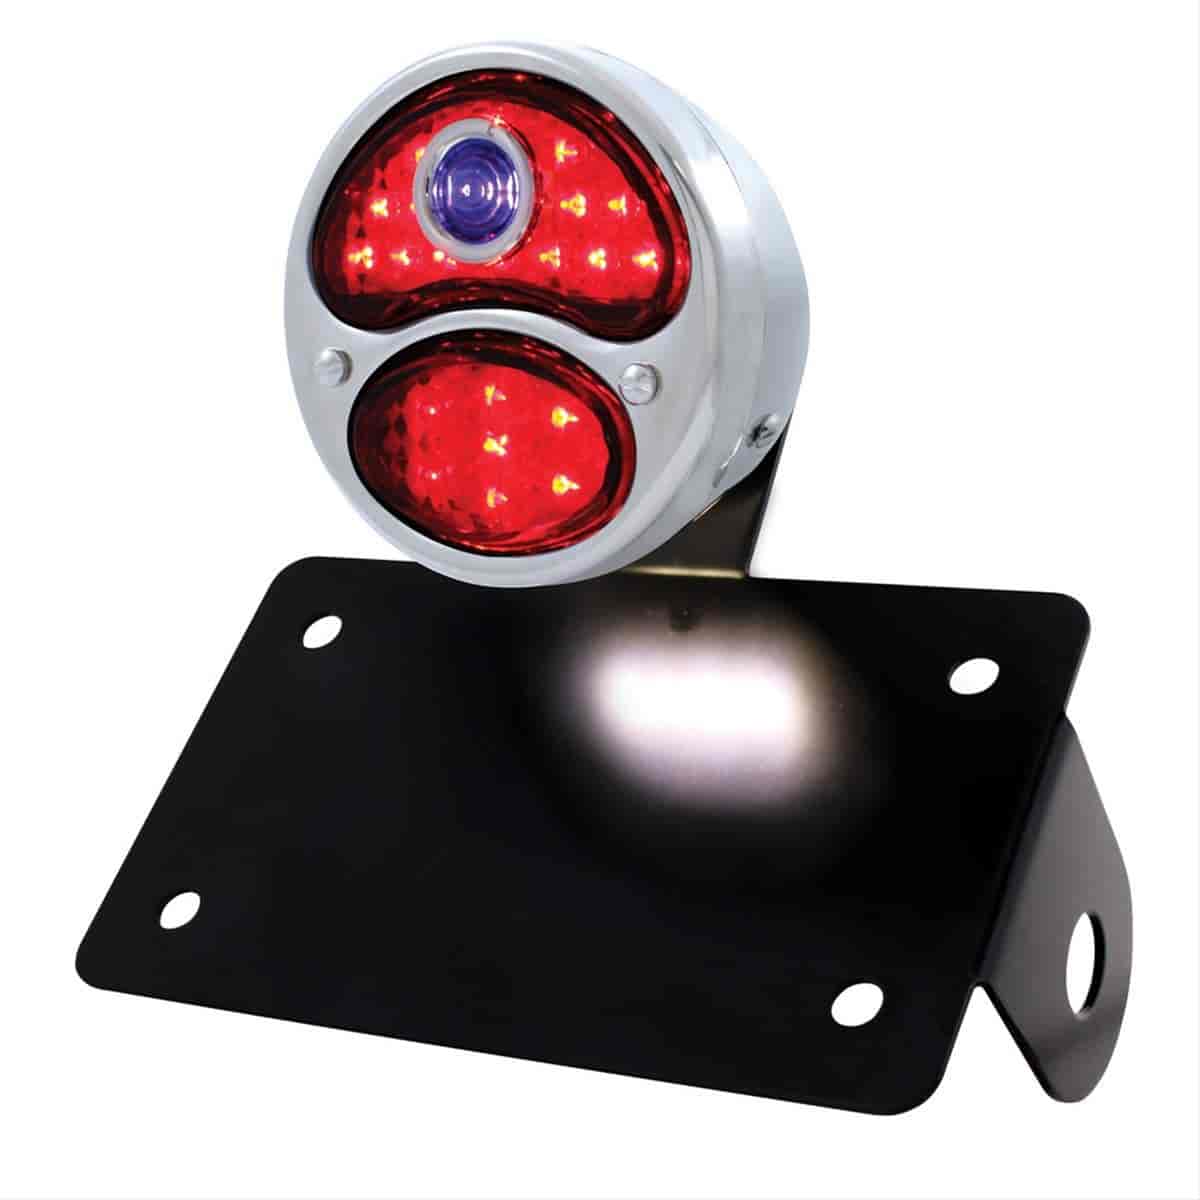 DUO LAMP LED TAILL LIGHT